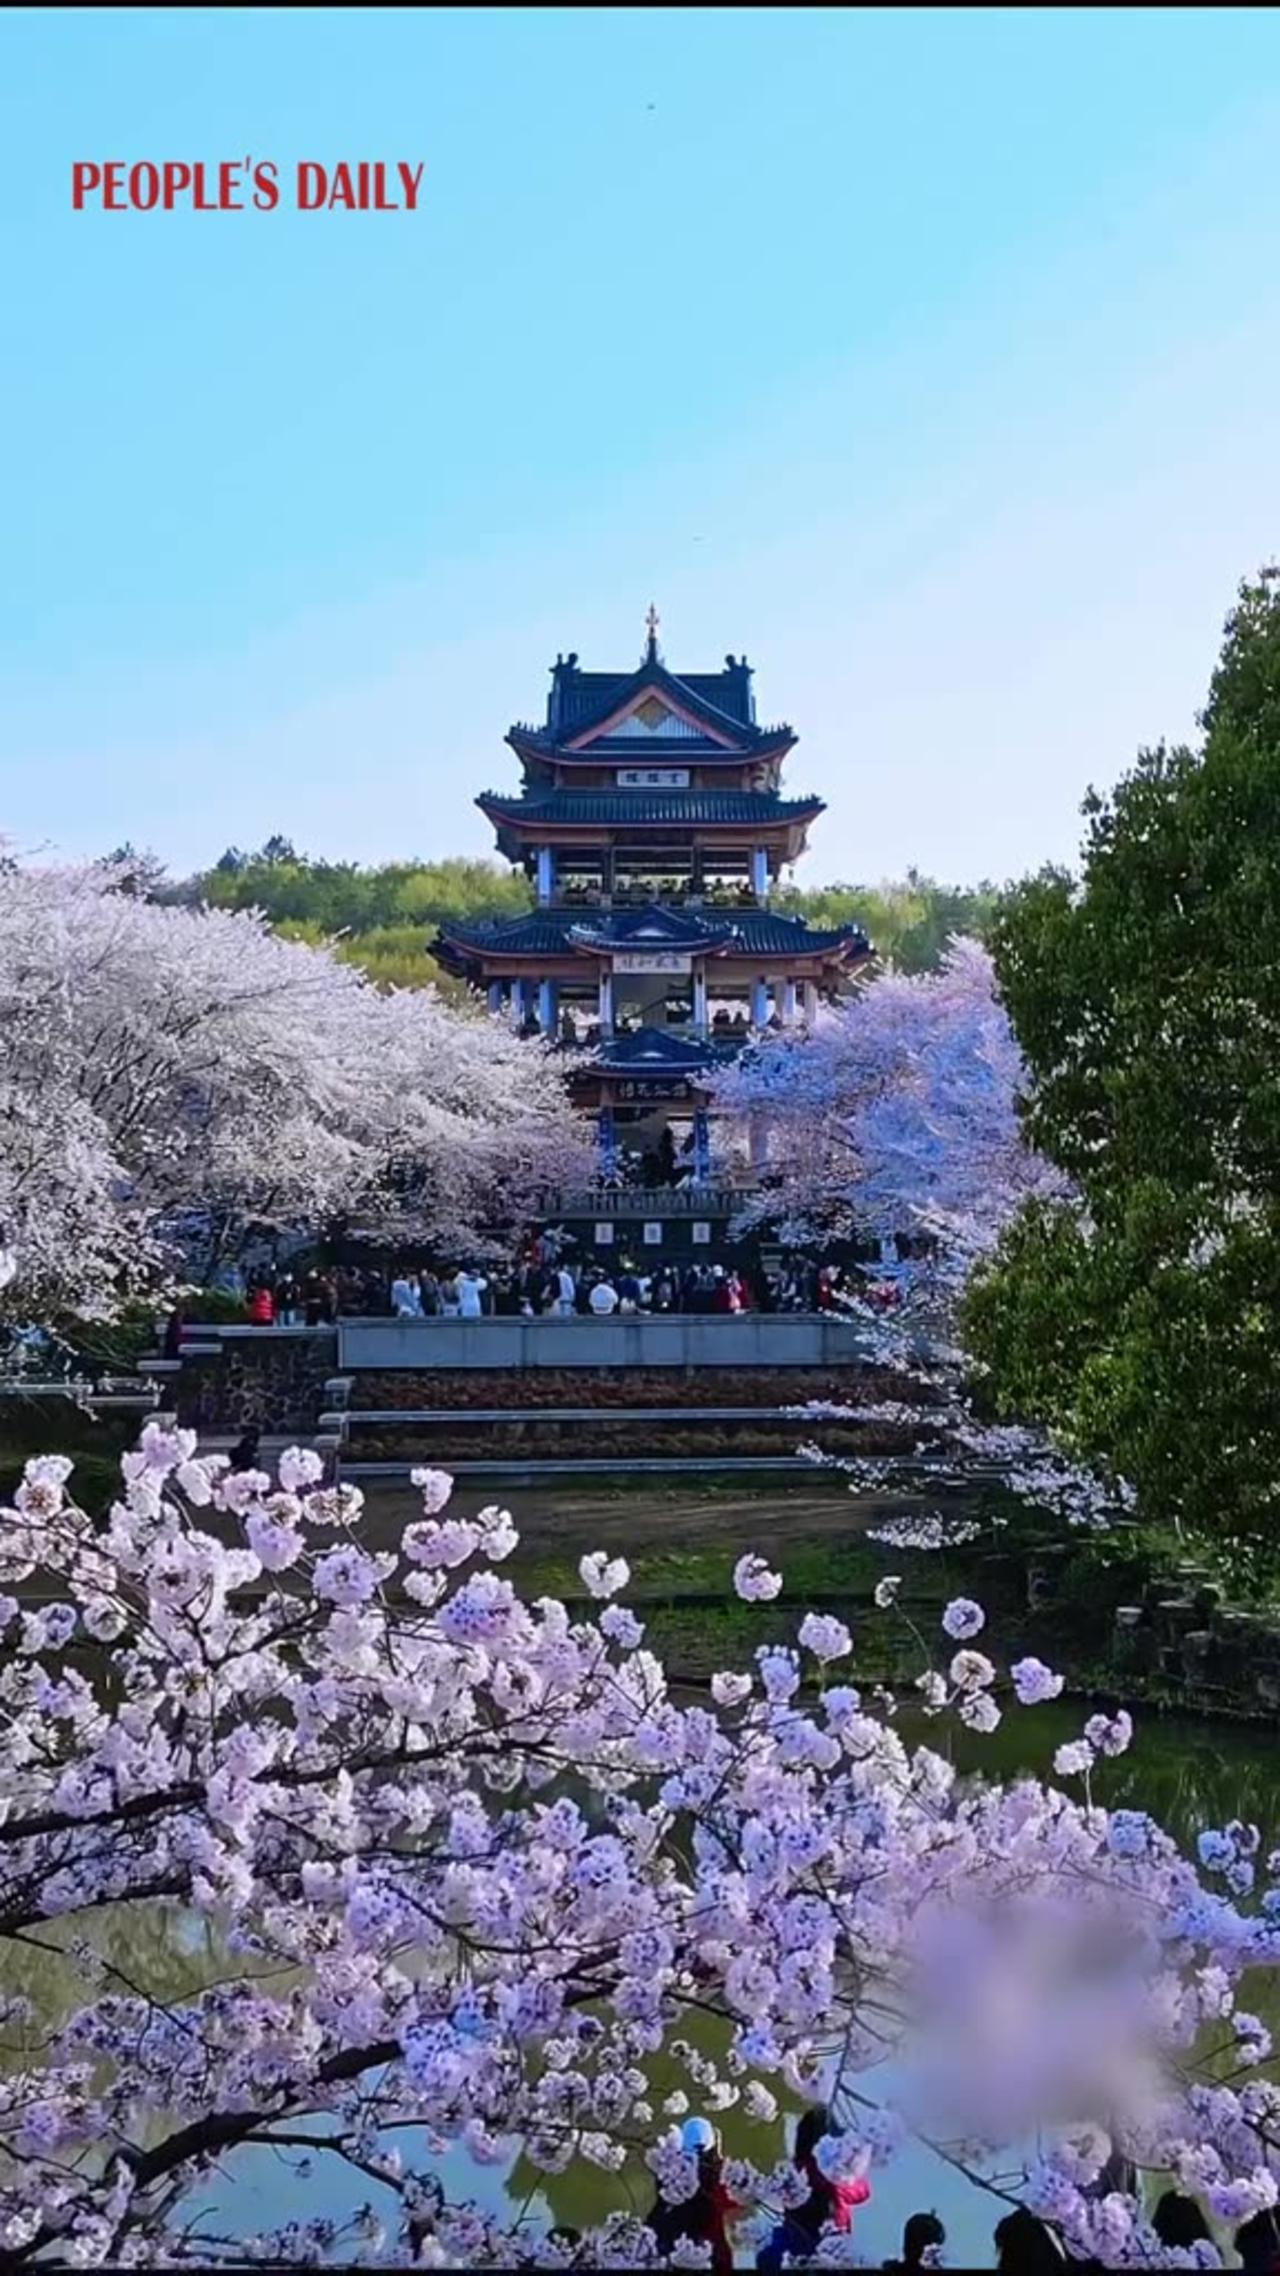 The Cherry blossom are in  full bloom in wuxi🌸🍒